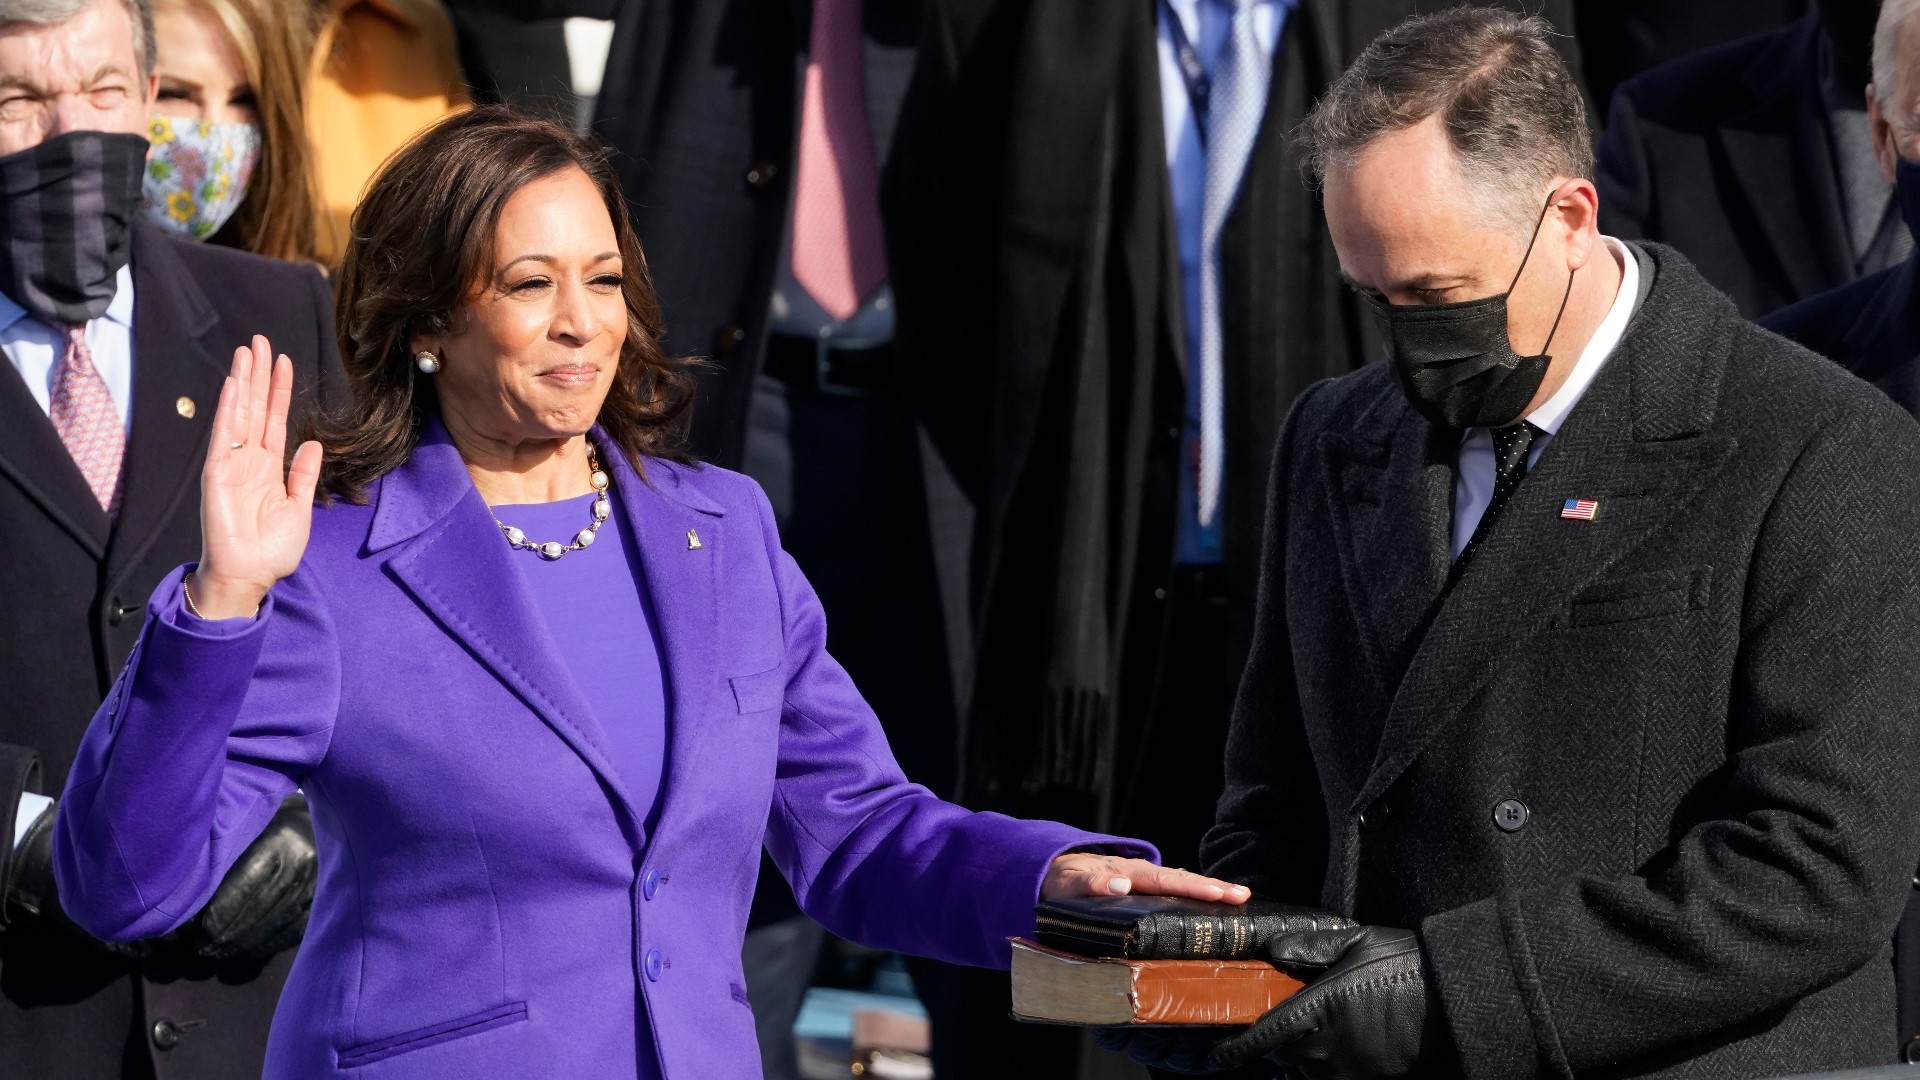 First seen wearing Converse and a pearl necklace on the campaign trail, Harris inspired local women to wear the sneakers and necklace combo on Inauguration Day.